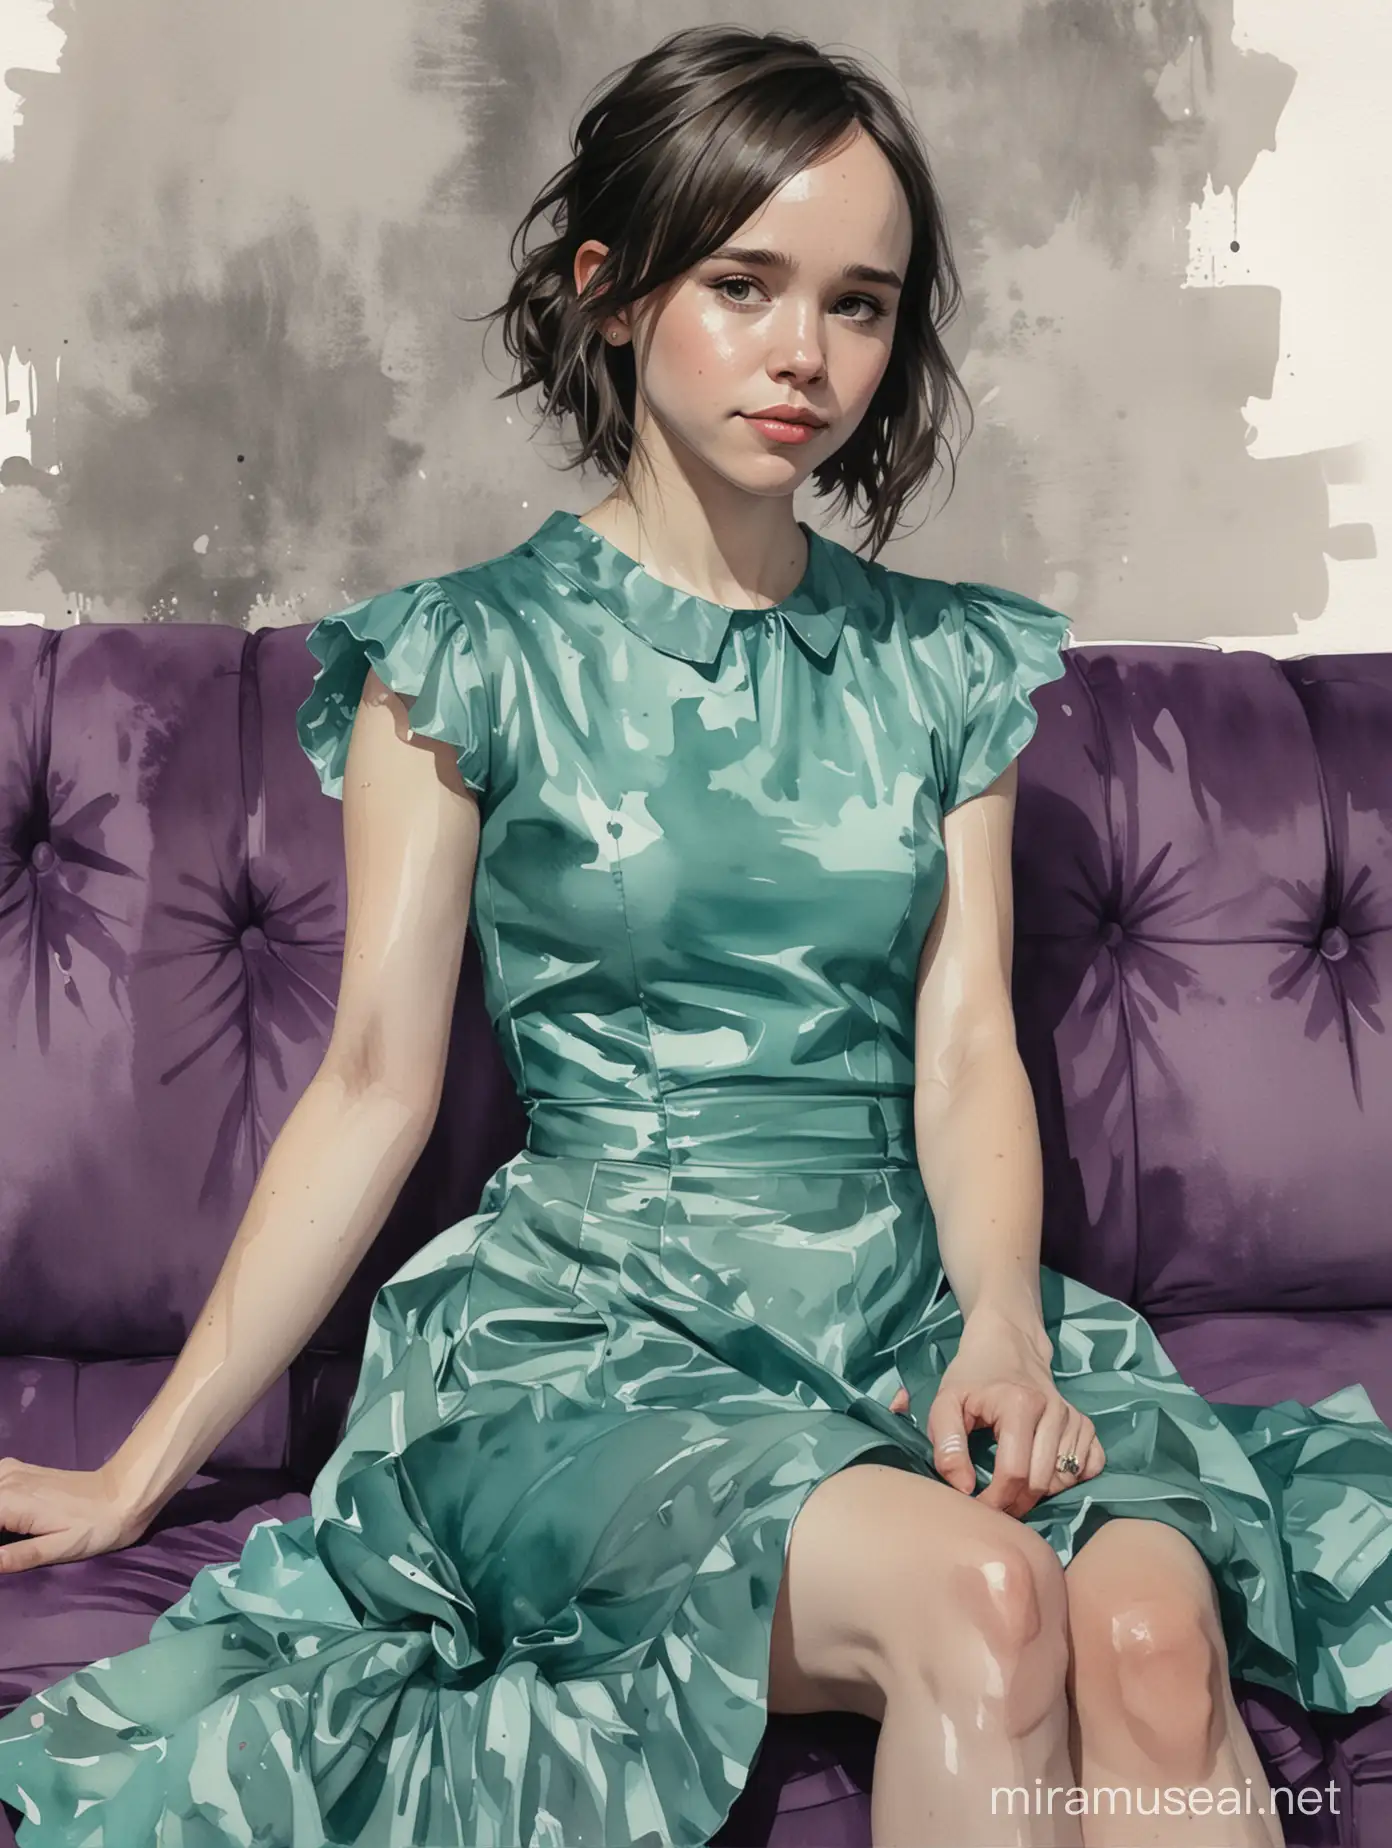 Seductive Ellen Page with Baby Dragon Teal Party Dress Illustration by Alex Maleev